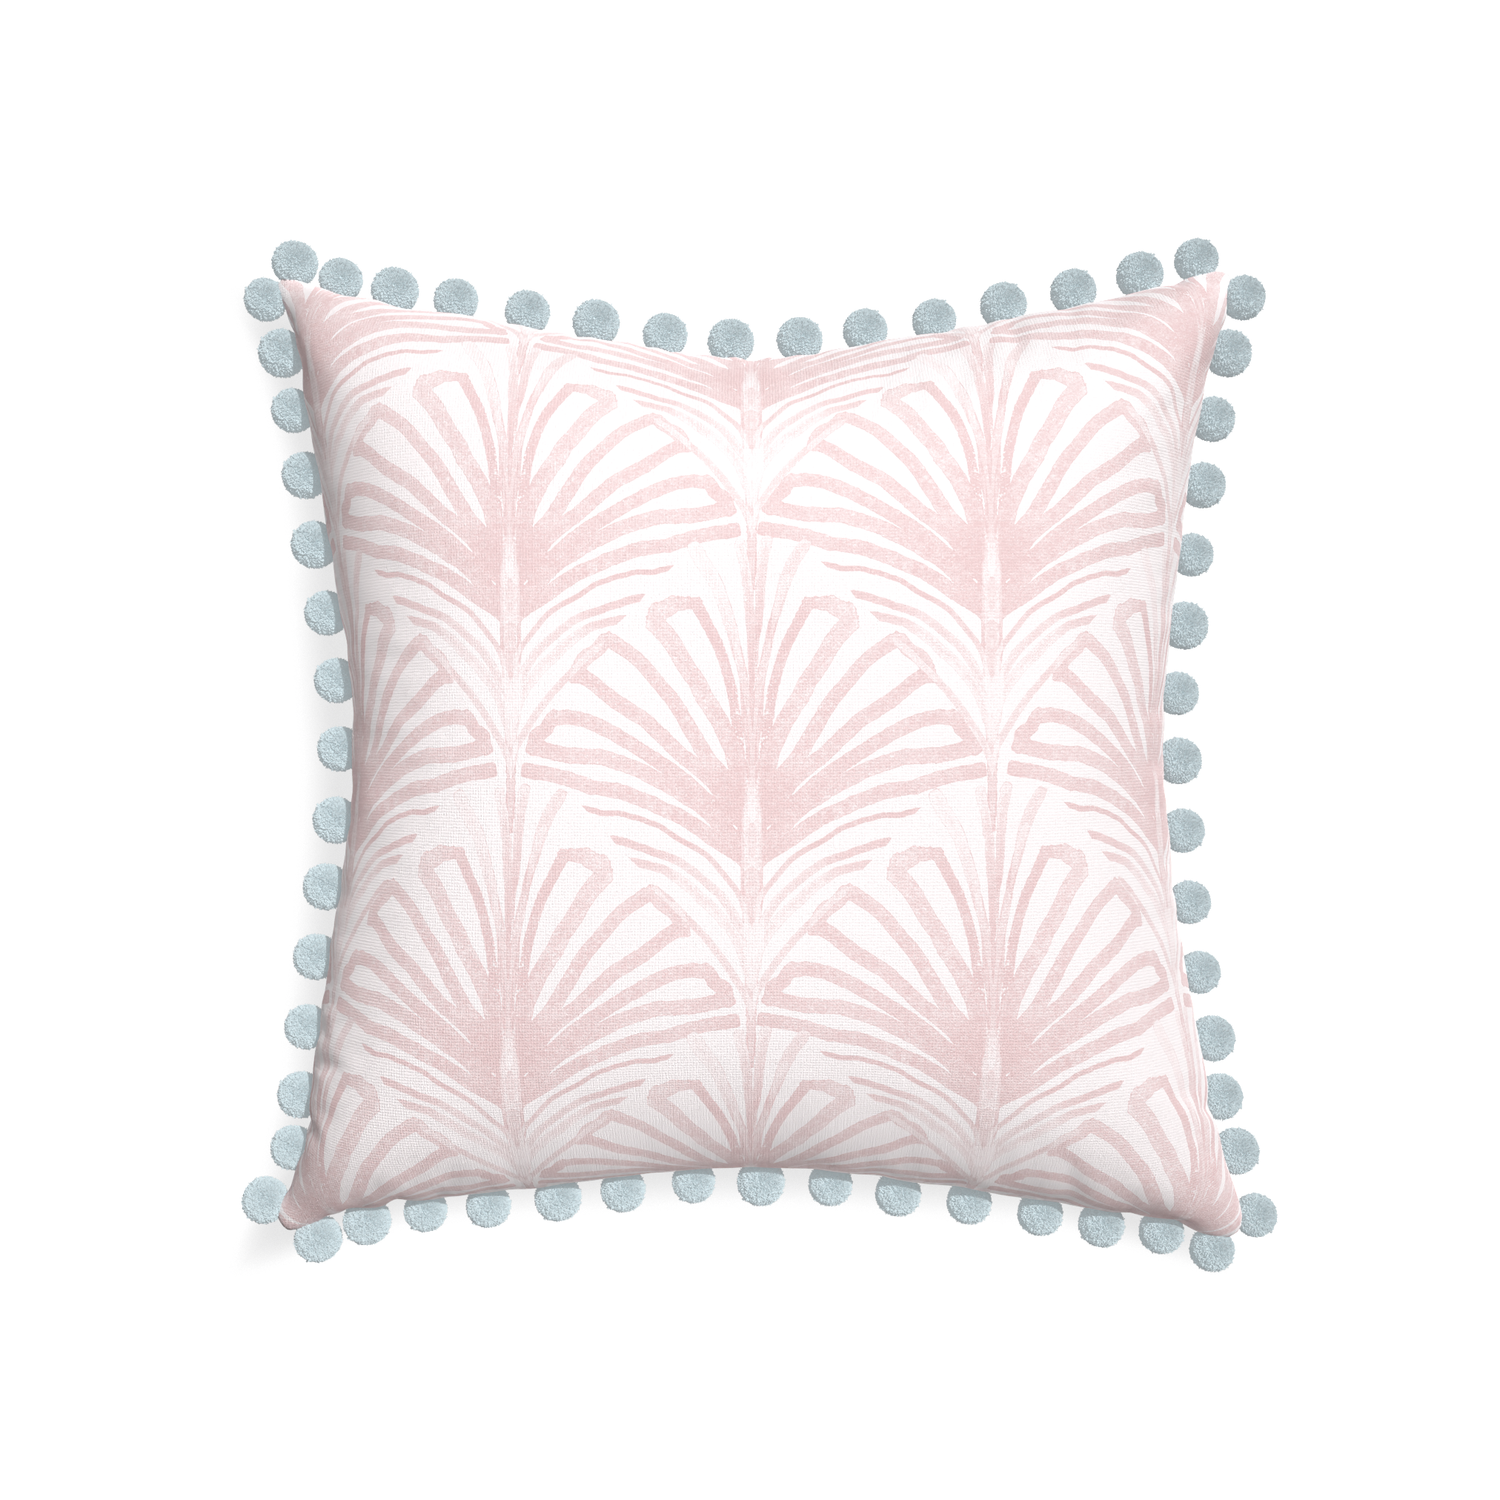 22-square suzy rose custom rose pink palmpillow with powder pom pom on white background